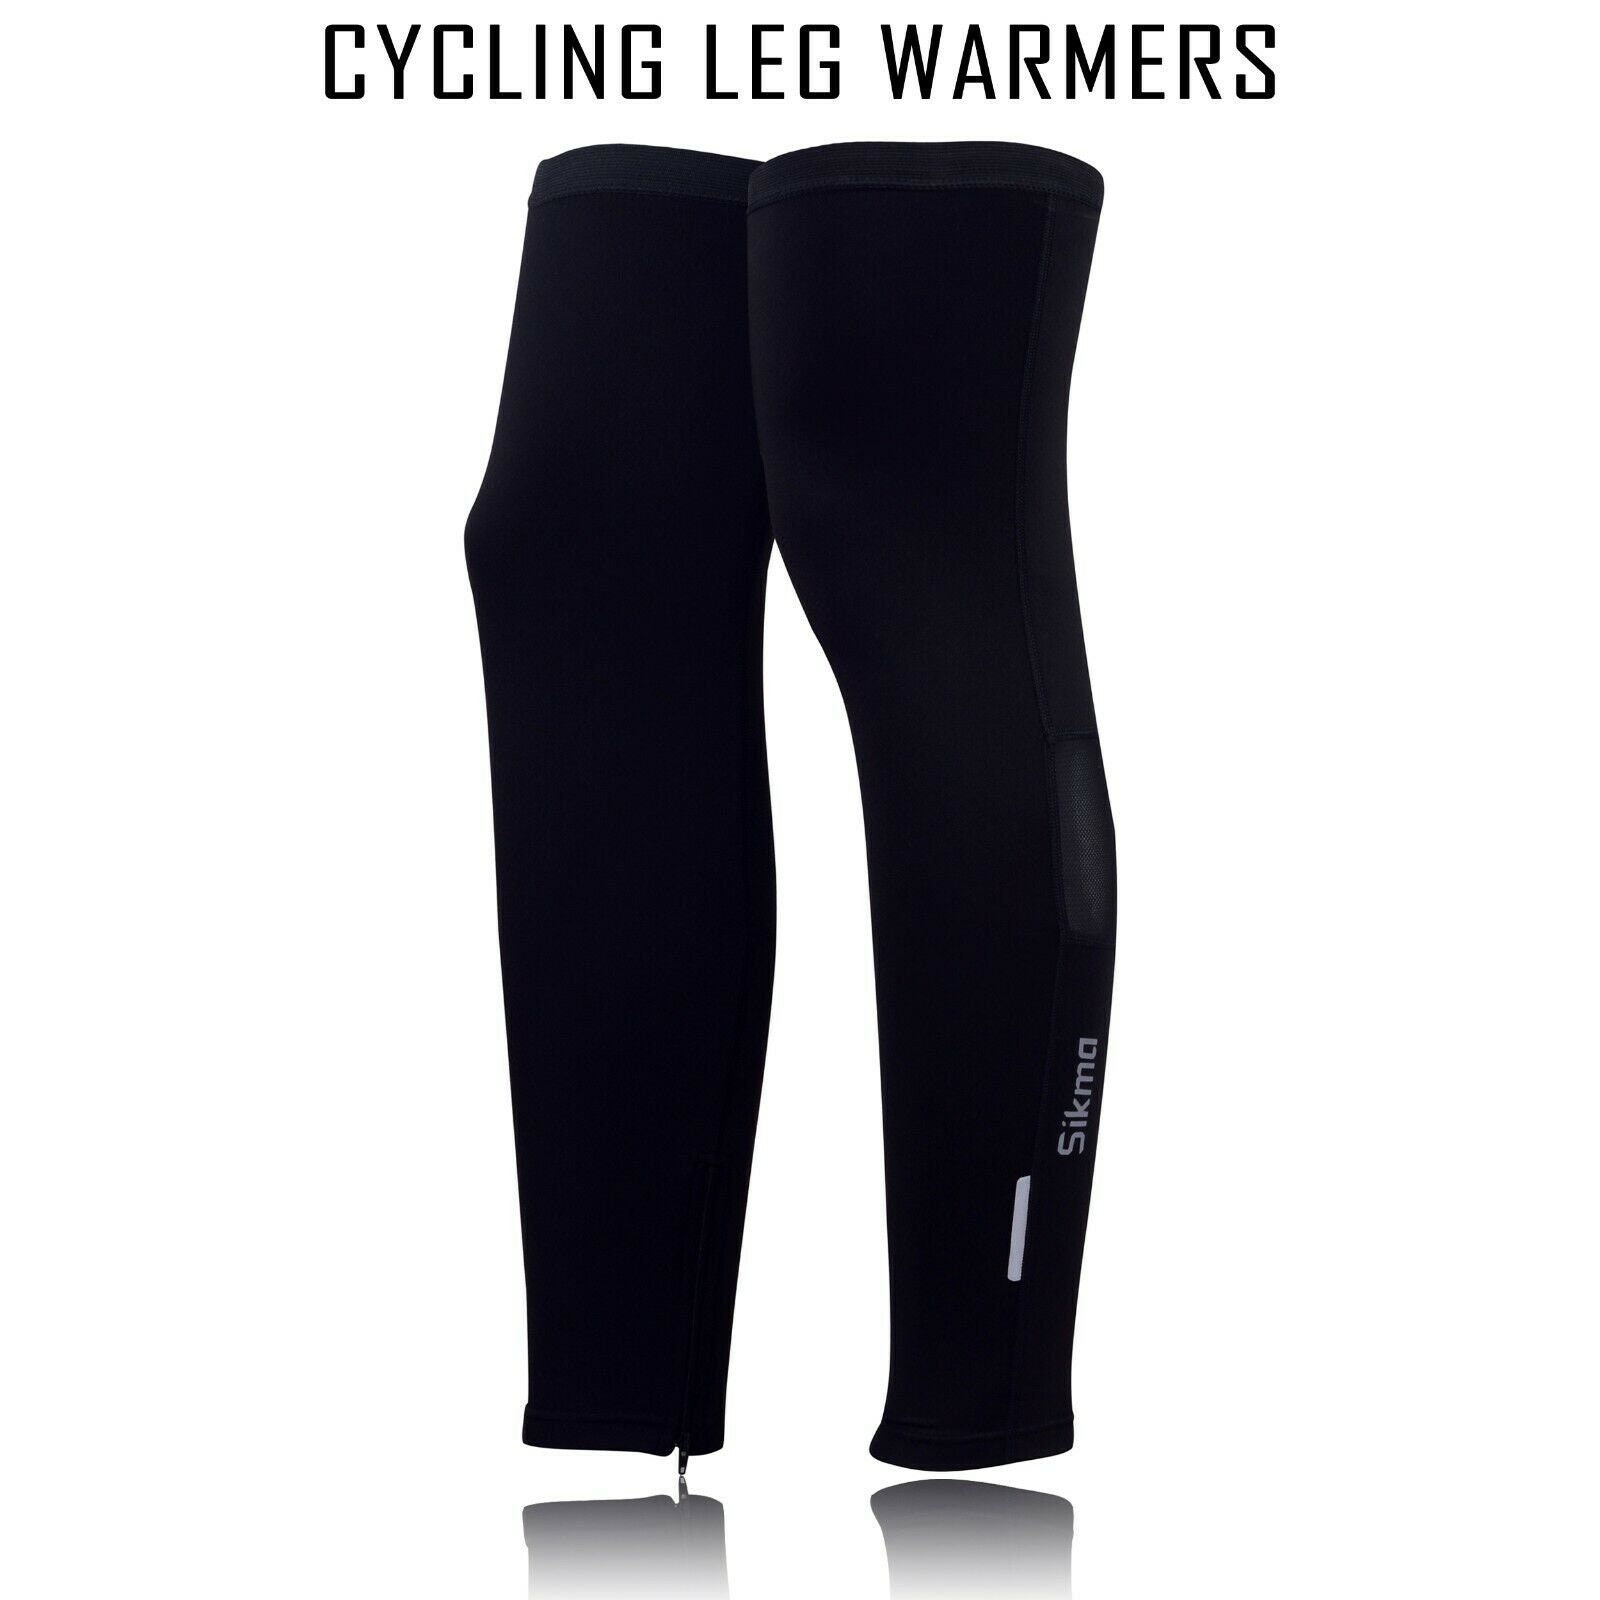 Cycling Winter Leg Warmers Bicycle Compression Running Thermal Roubaix Knee Pair